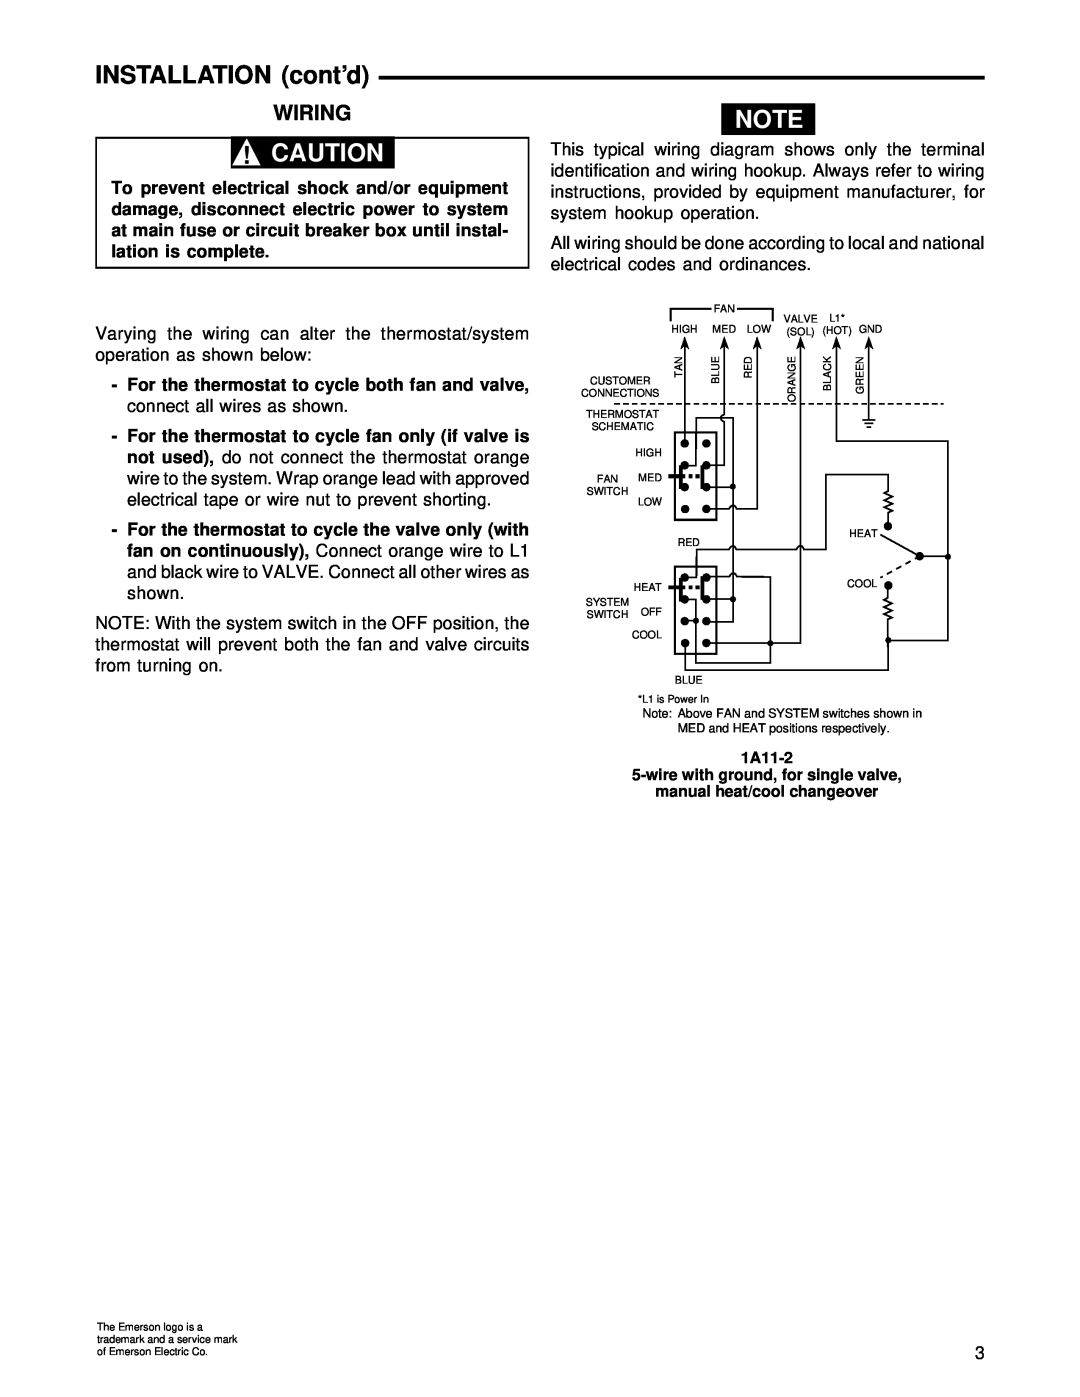 Emerson 1A11-2 installation instructions INSTALLATION cont’d, Wiring 